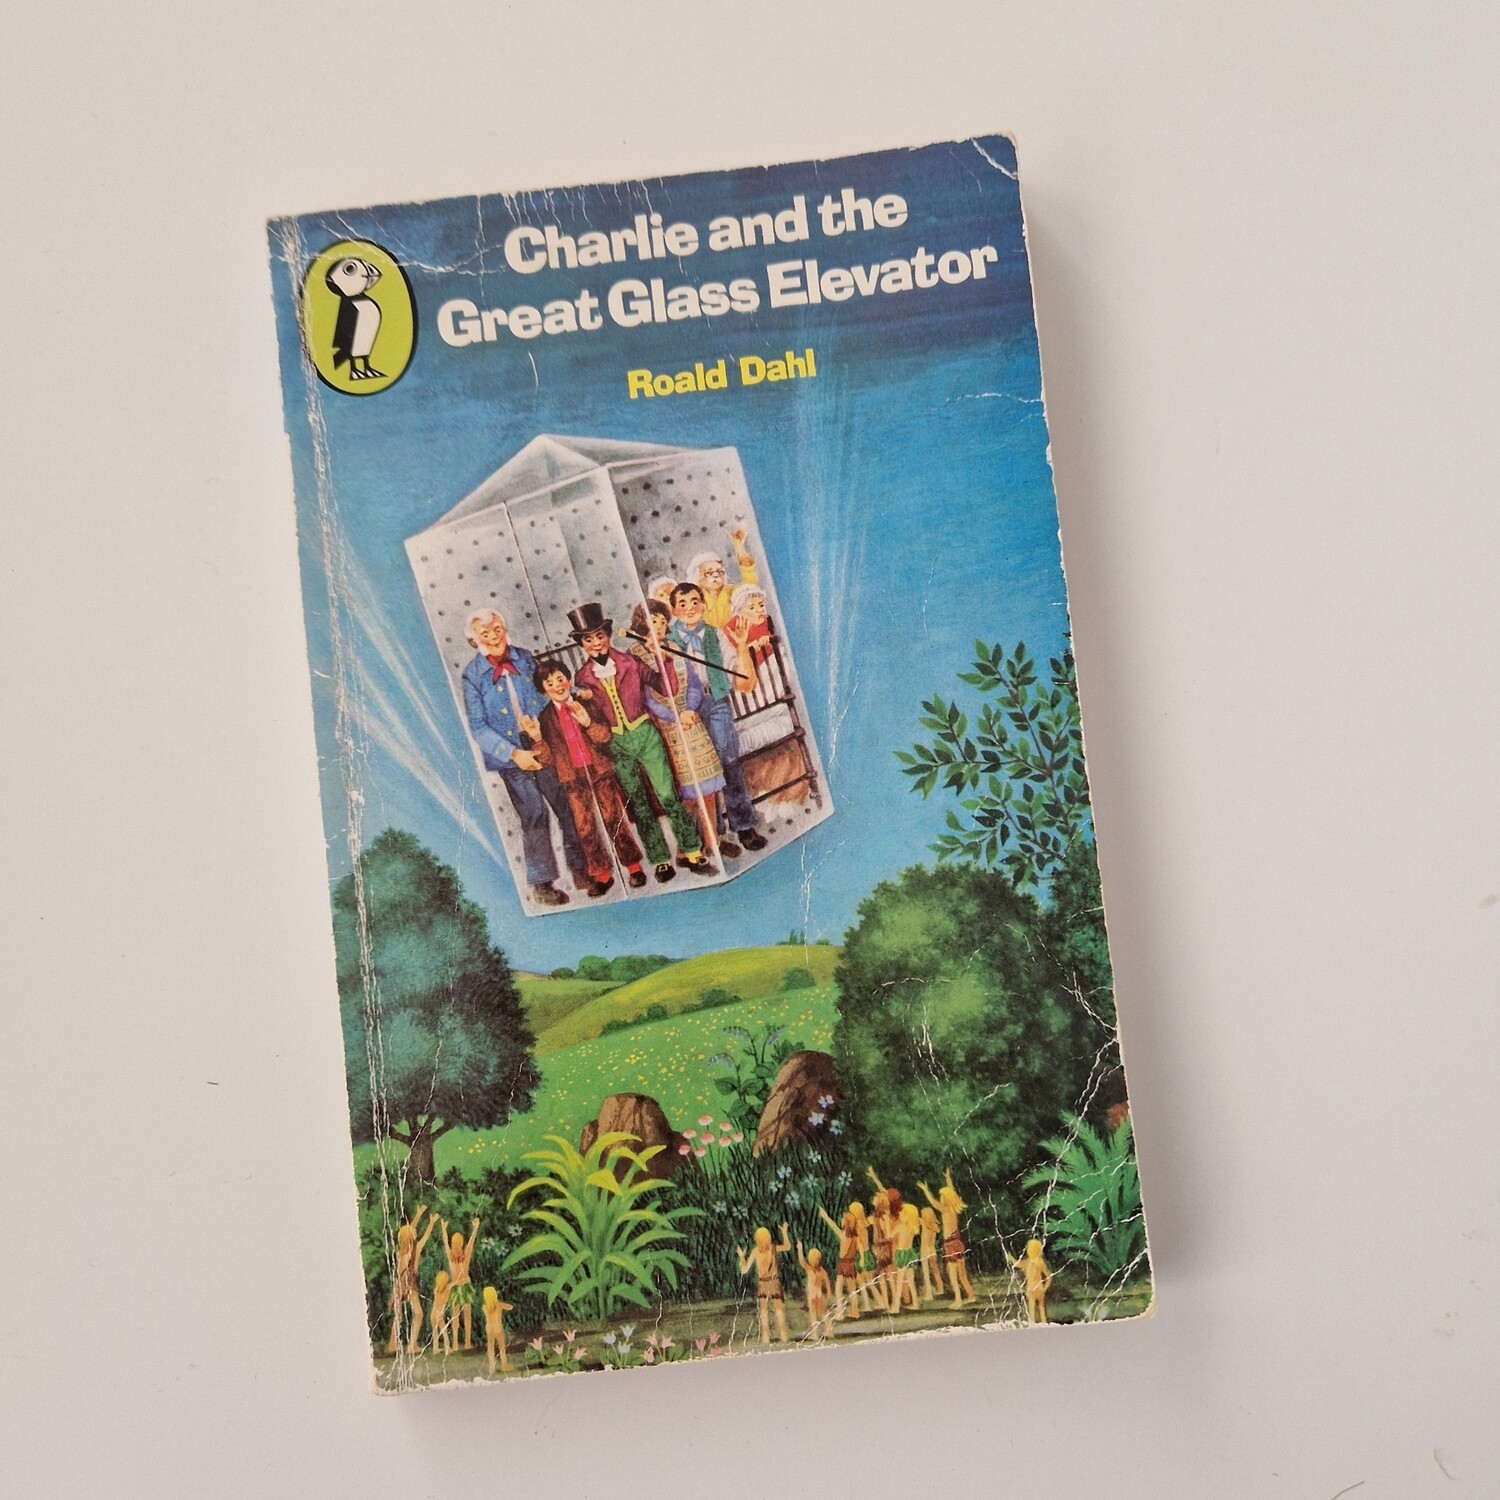 Roald Dahl Charlie and the Great Glass Elevator Notebook- made from a paperback book